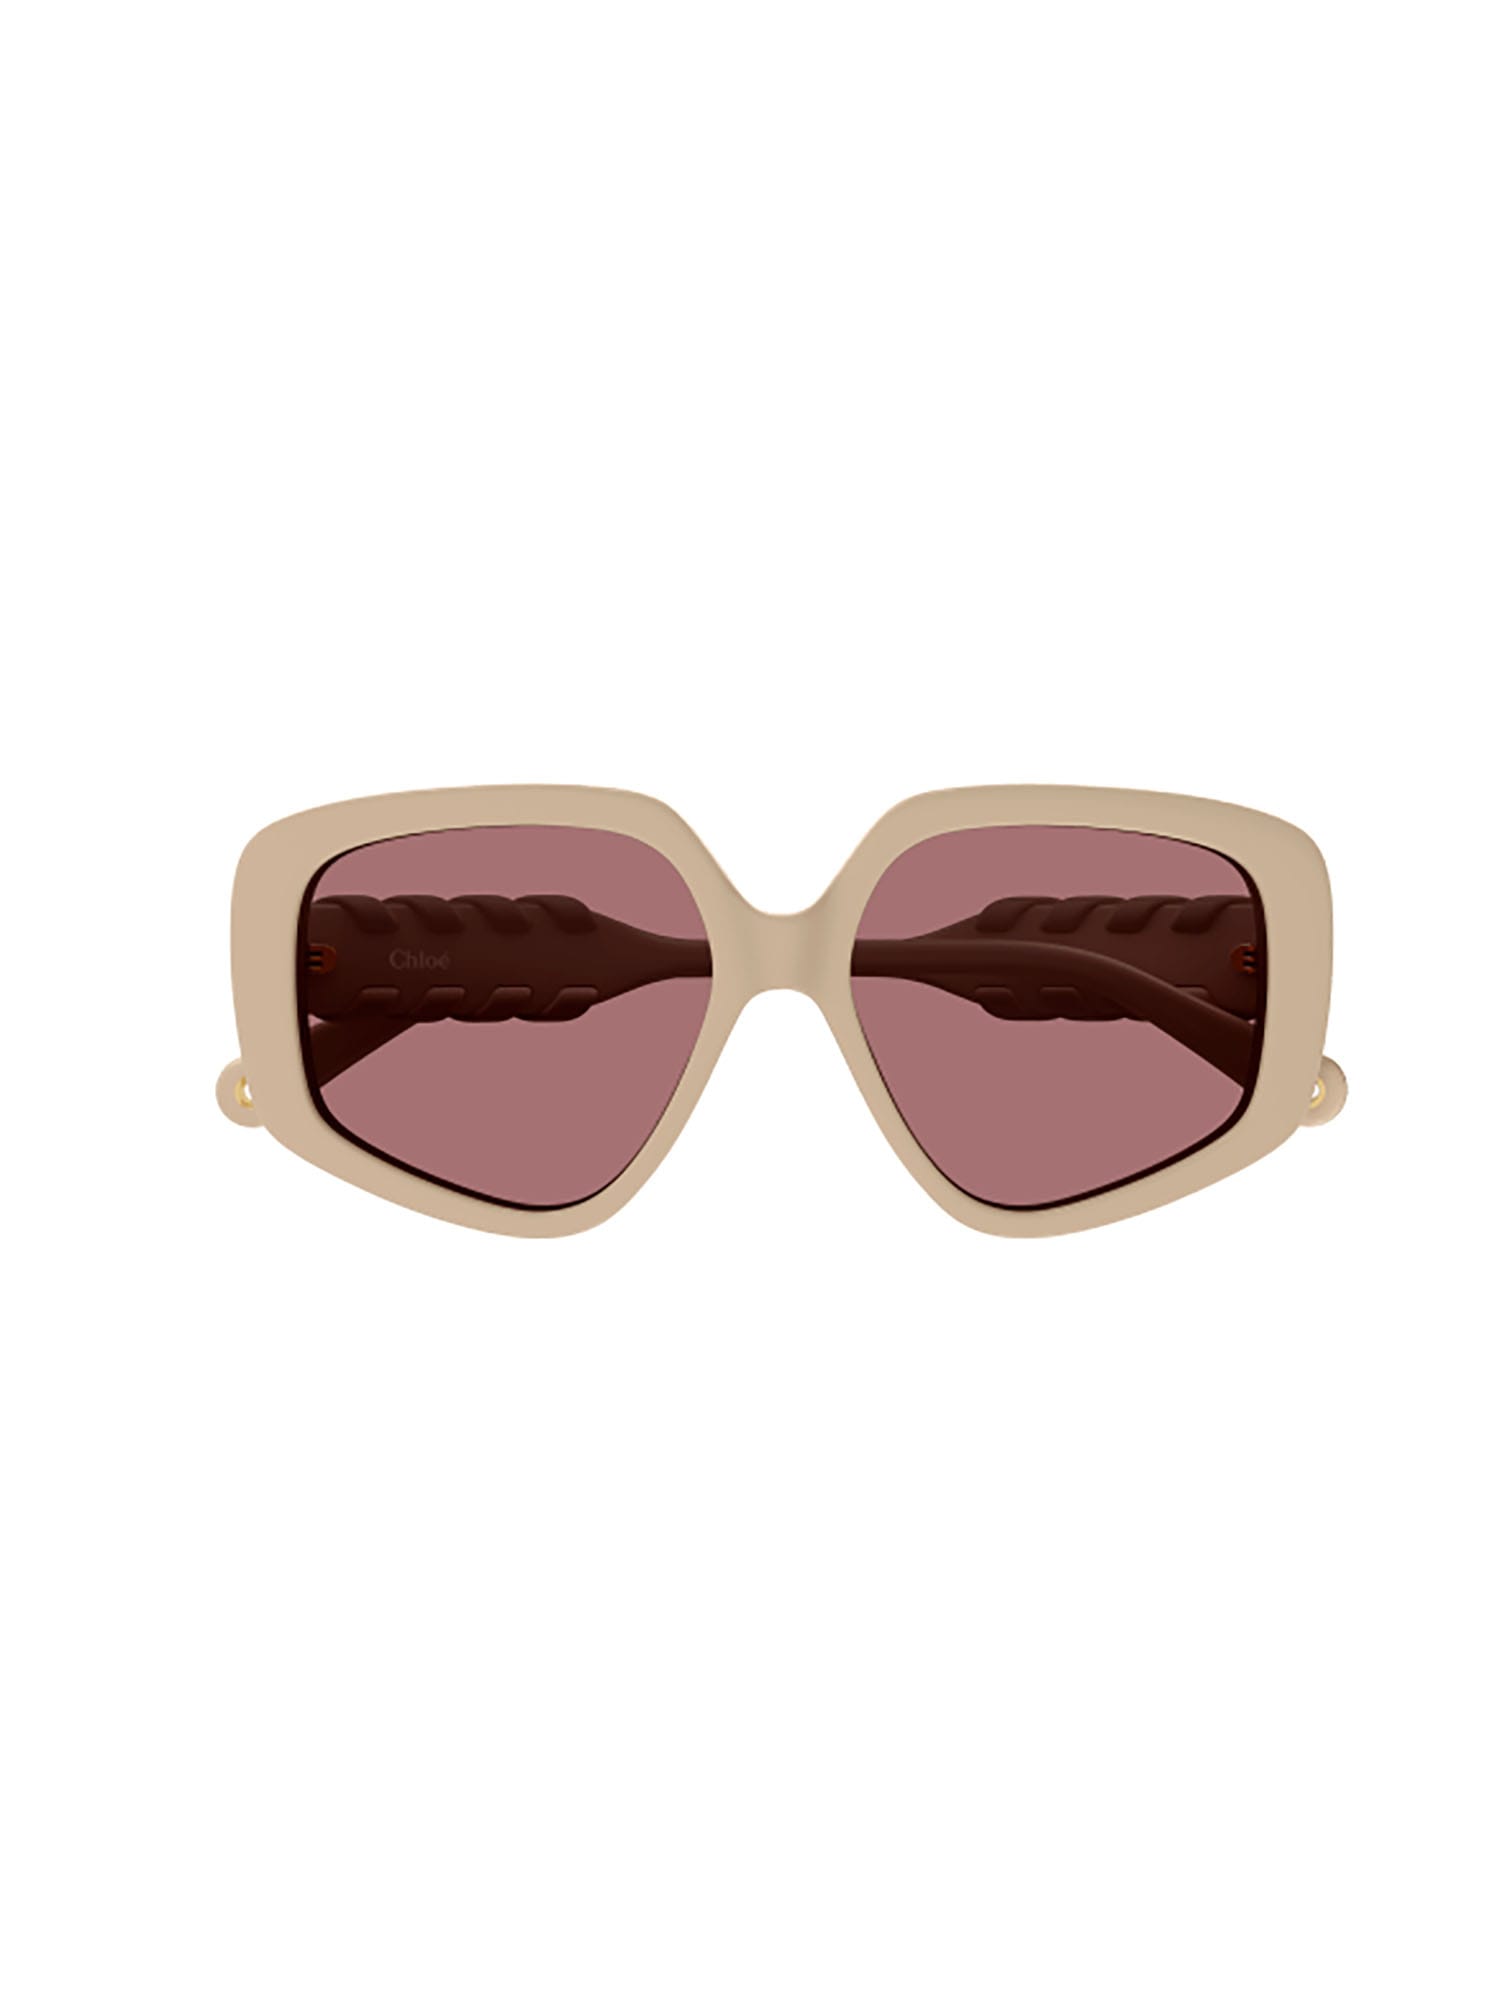 Chloé Ch0210s Sunglasses In Ivory Ivory Red